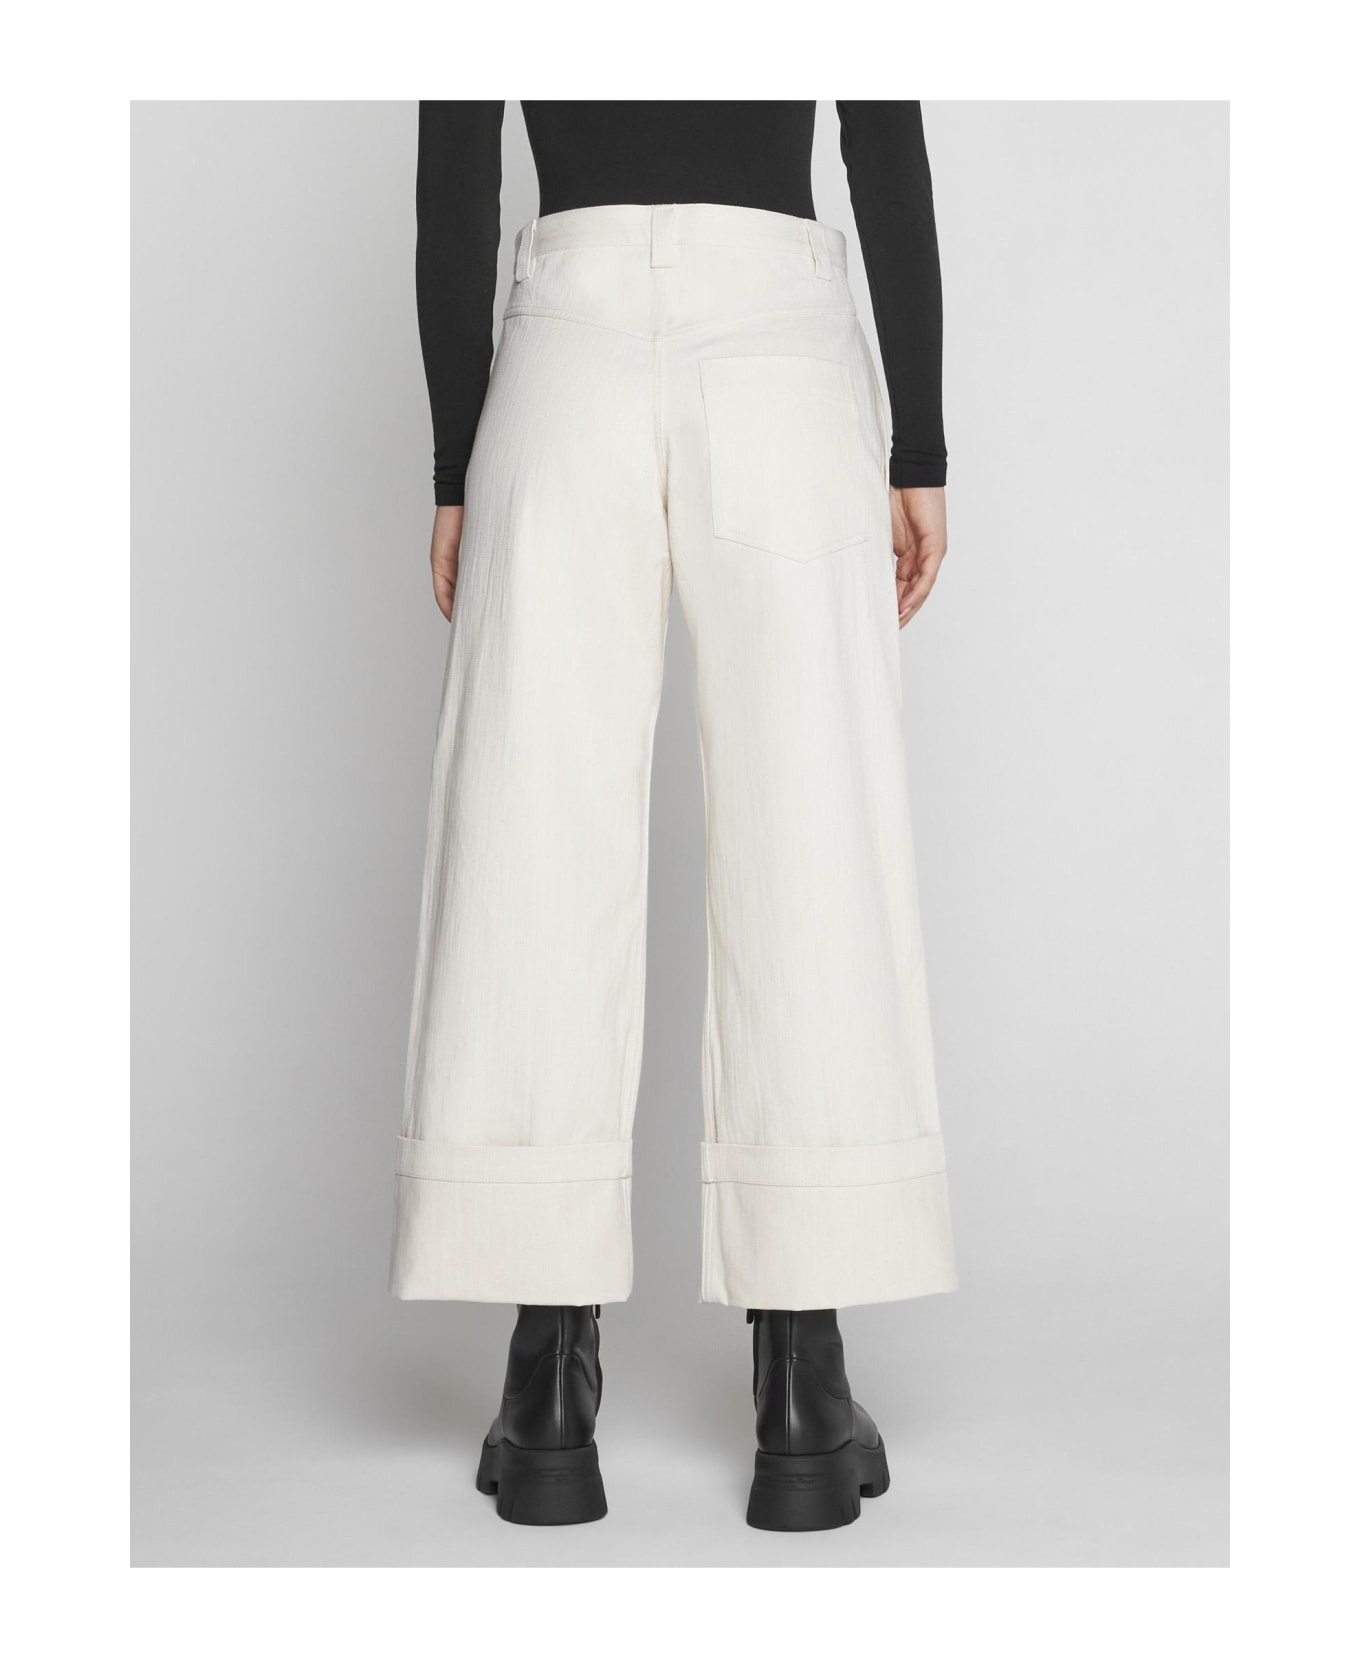 Moncler Genius Flared Cropped Jeans - WHITE ボトムス